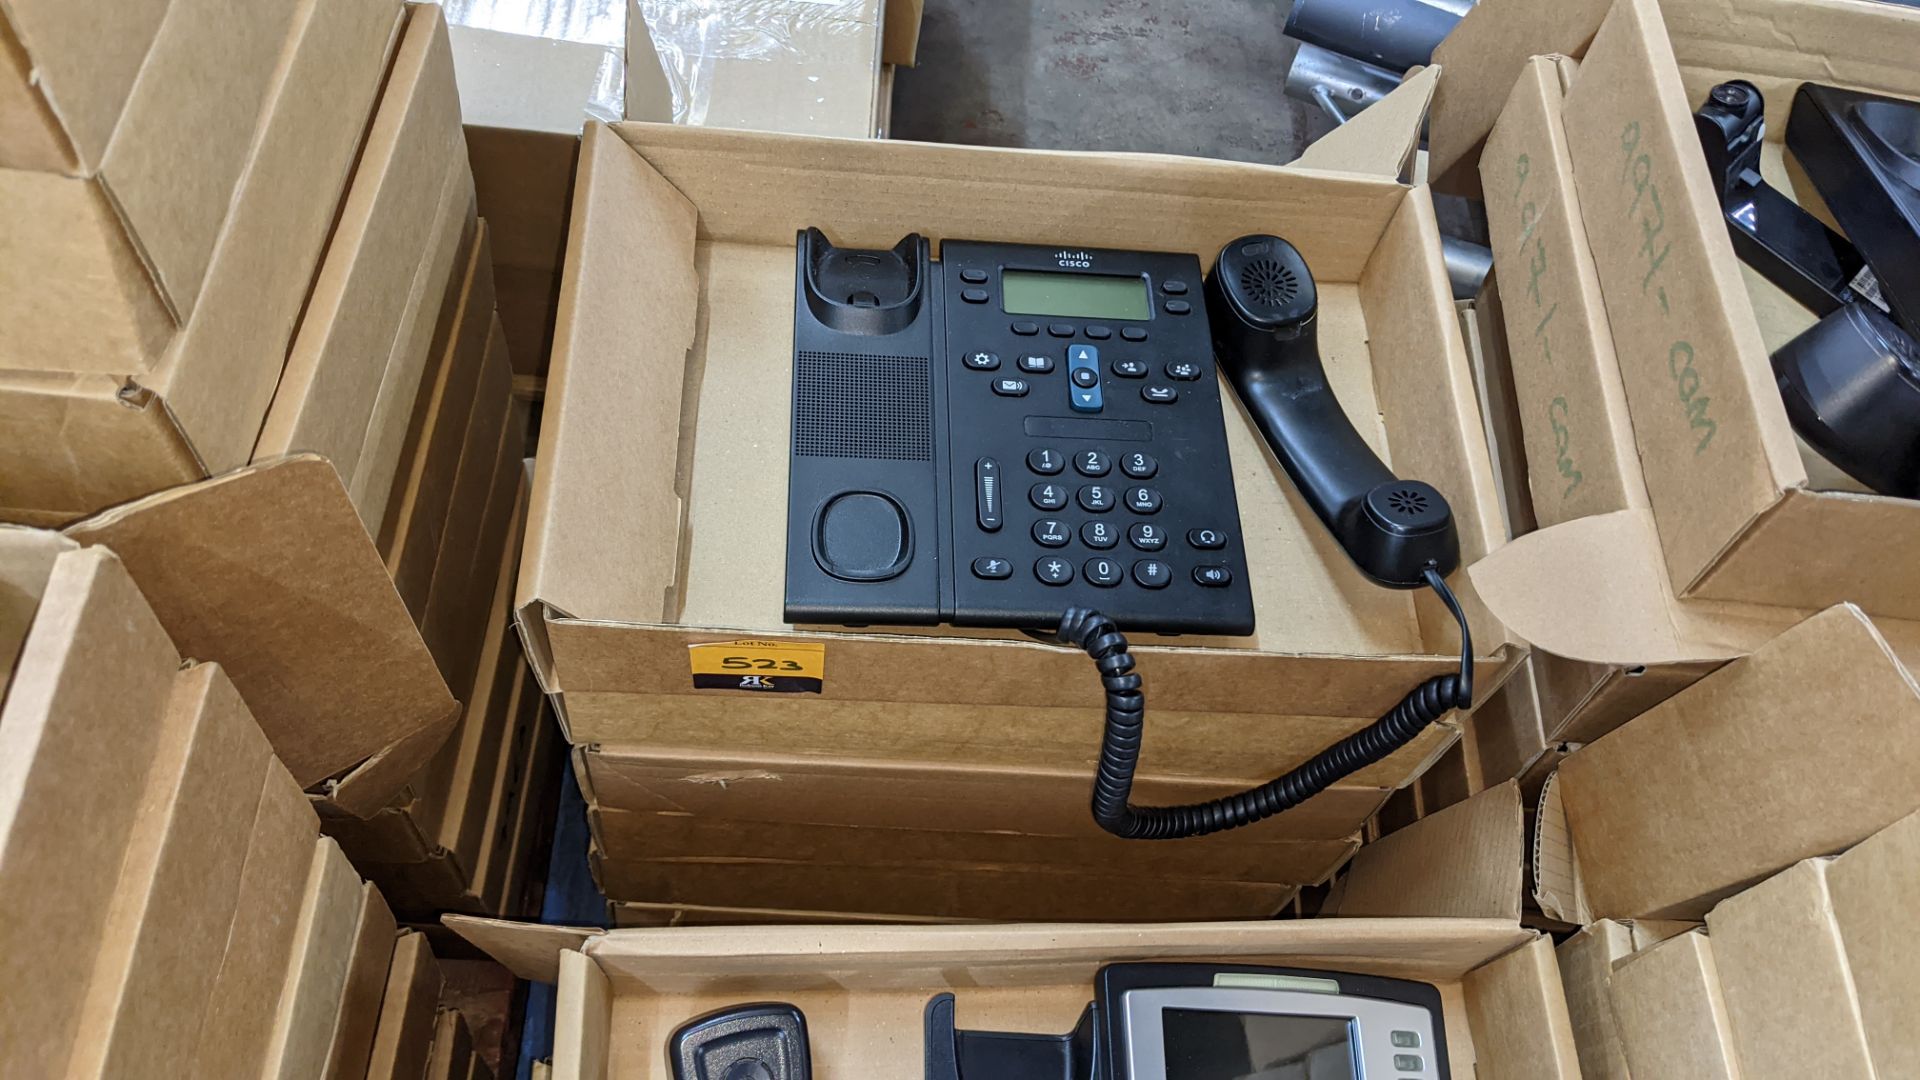 7 off Cisco telephone handsets model CP-6945